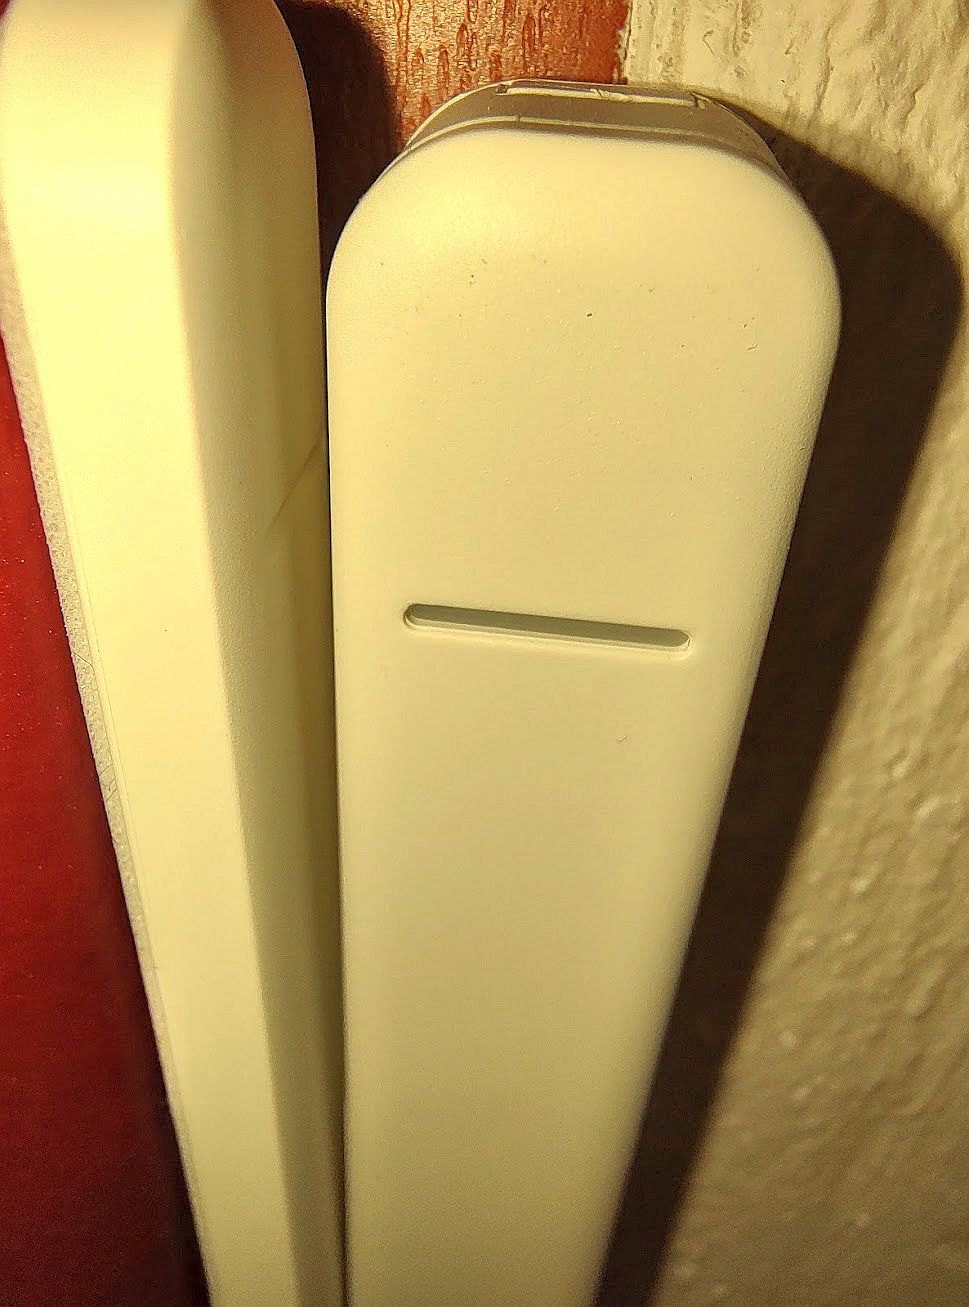 Parasoll sensor mounted on the door, blinks red when the status changes.